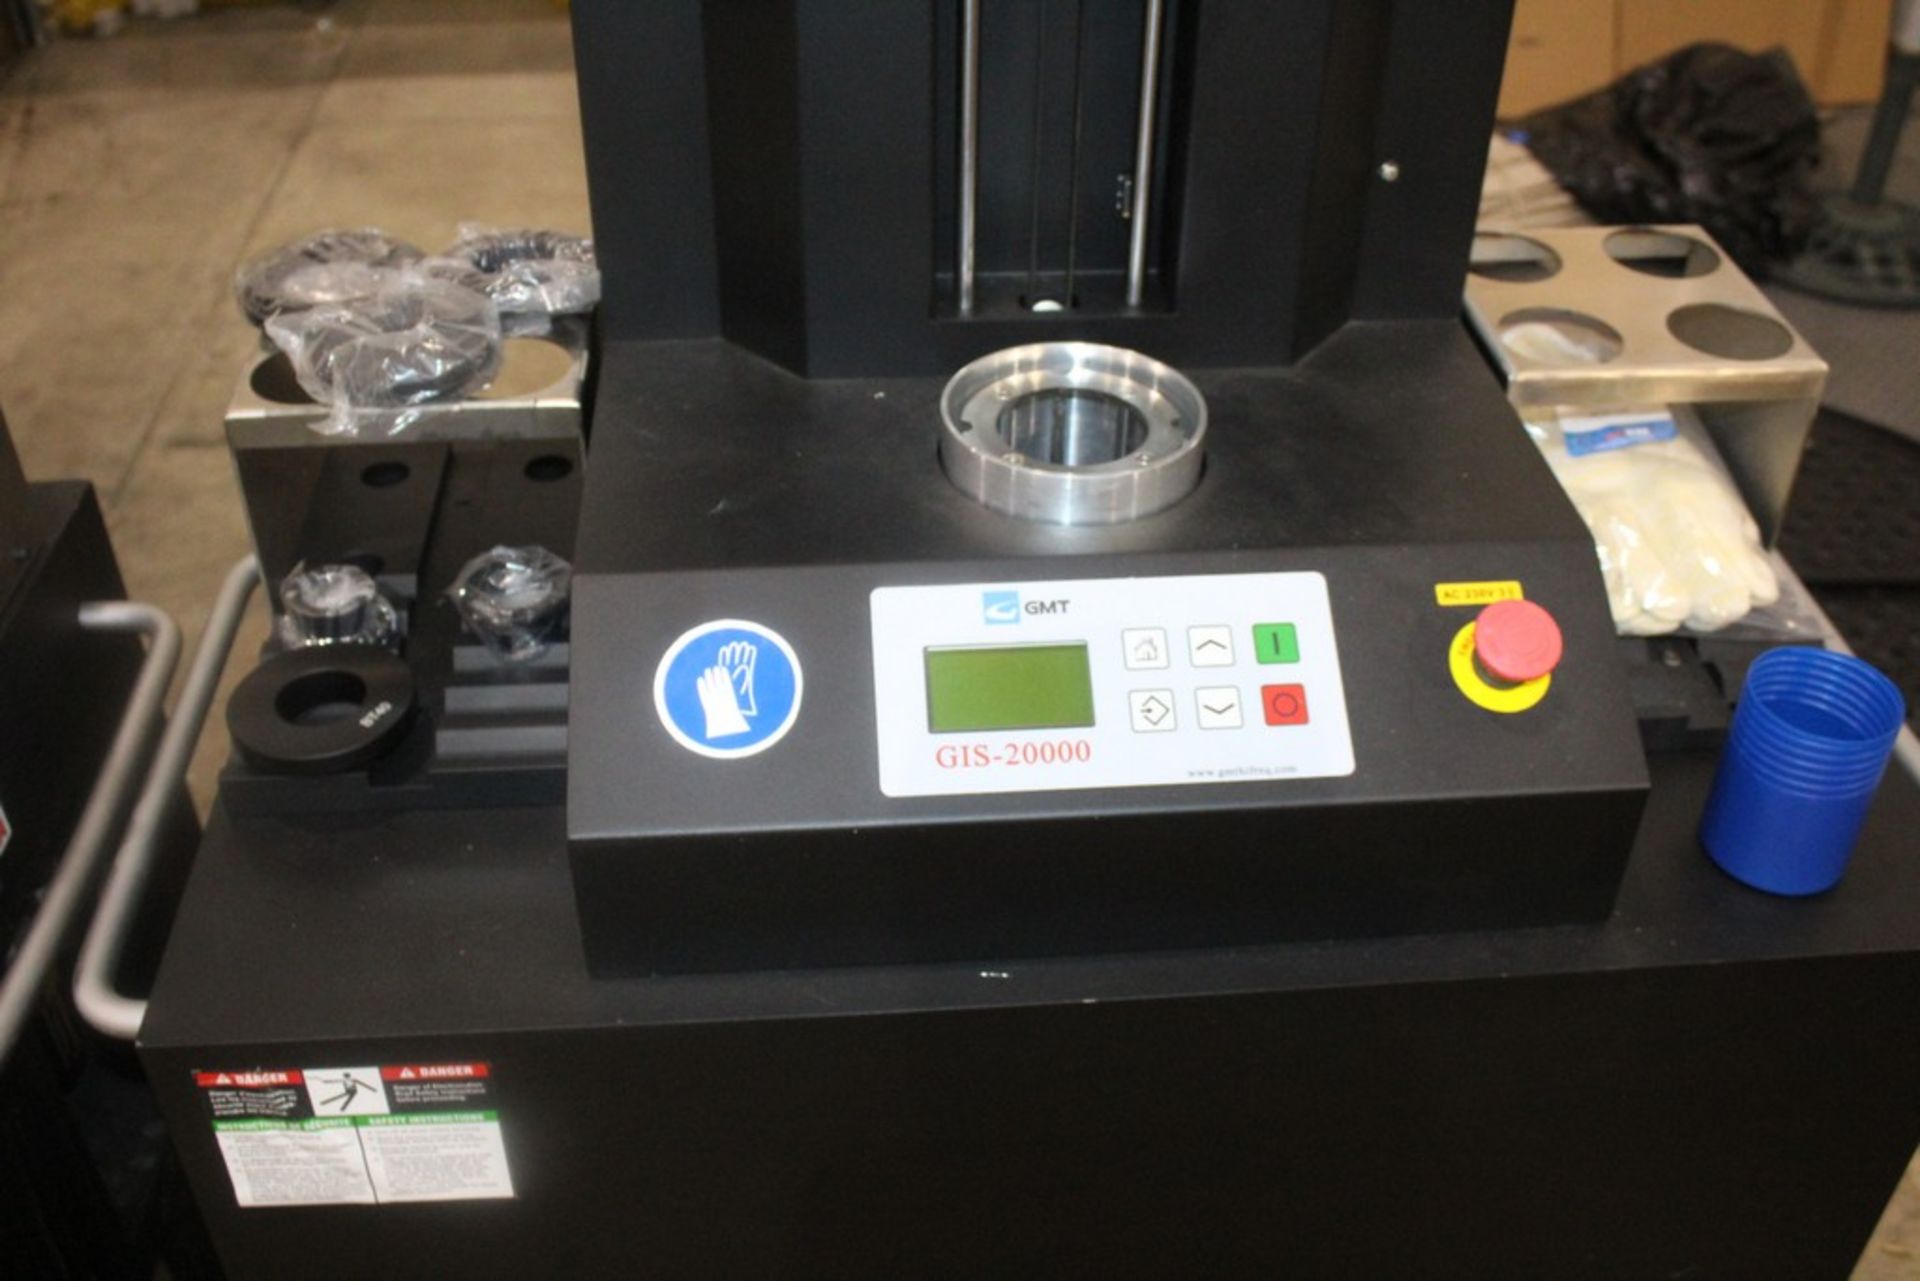 GMT Global Model GIS-20000 Shrink Fit Machine (New 2016-Never Used) - Image 2 of 6